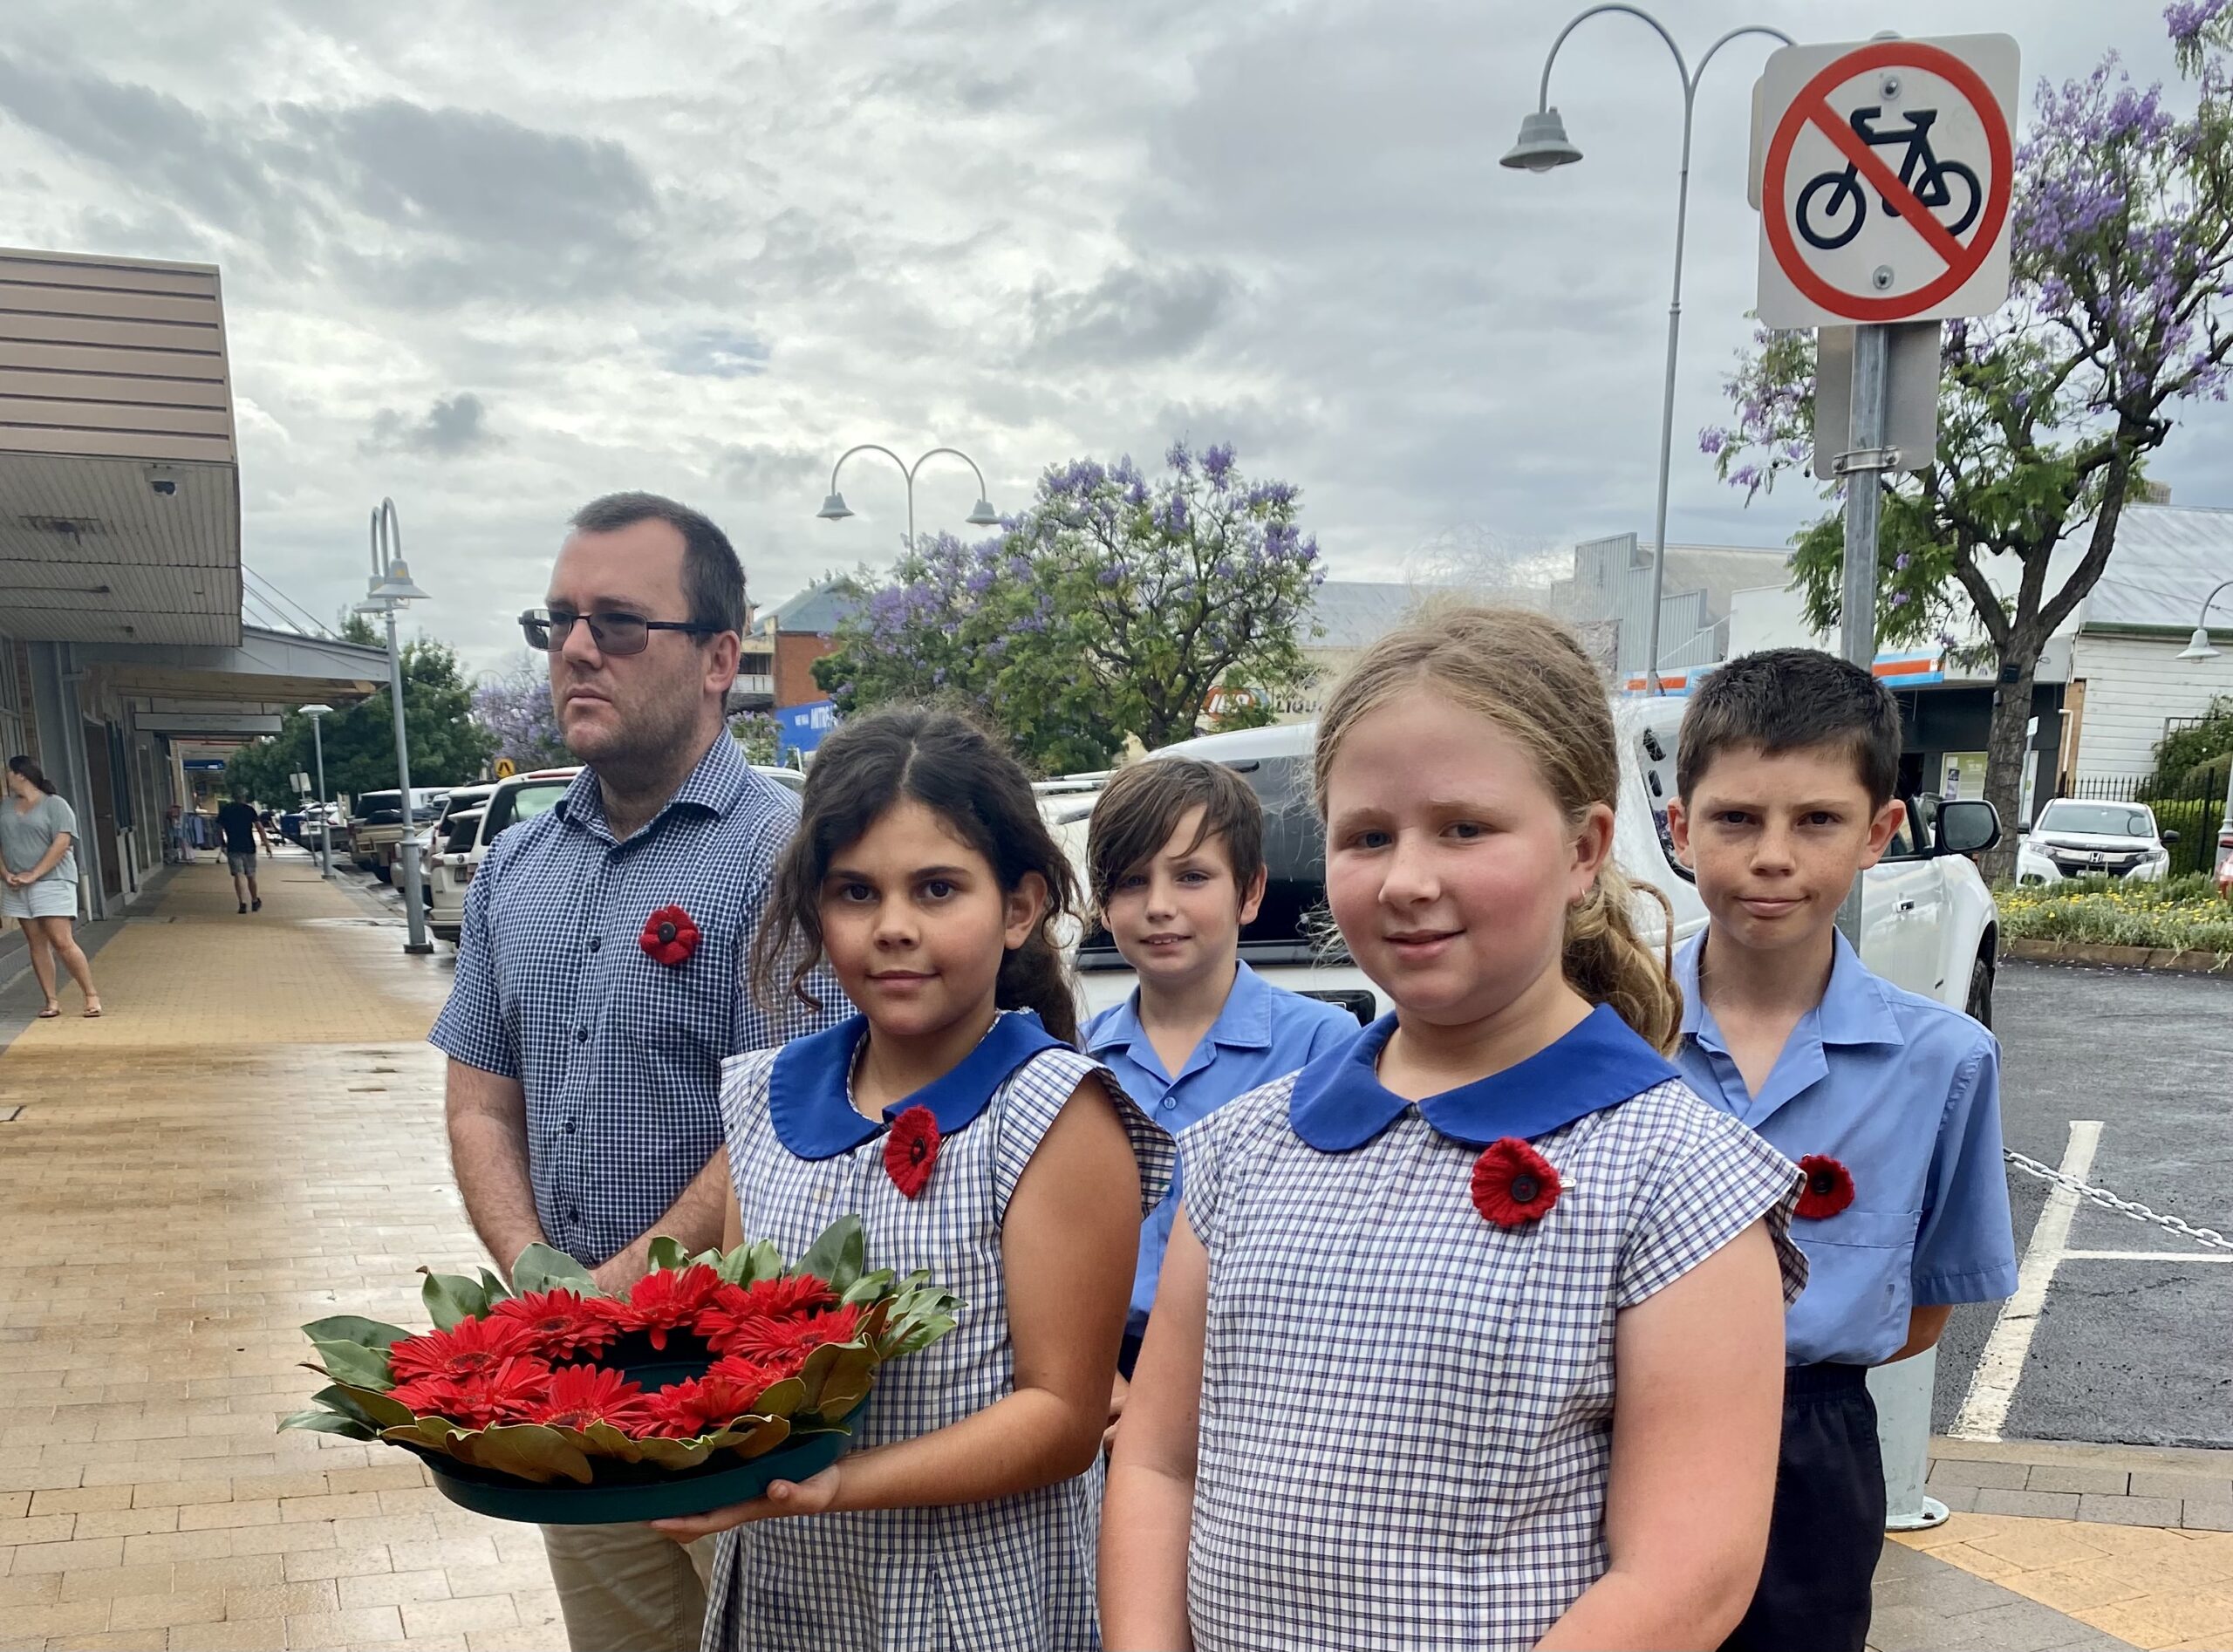 Namoi Valley Christian School principal Peter Henderson with students, back, Bailey Mihai and James Smith, front, Vienna Eather and Scarlett Wohling. The students were praised by community members for taking part in the ceremony so respectfully and for considerately laying a wreath at Memory Grove with great care.